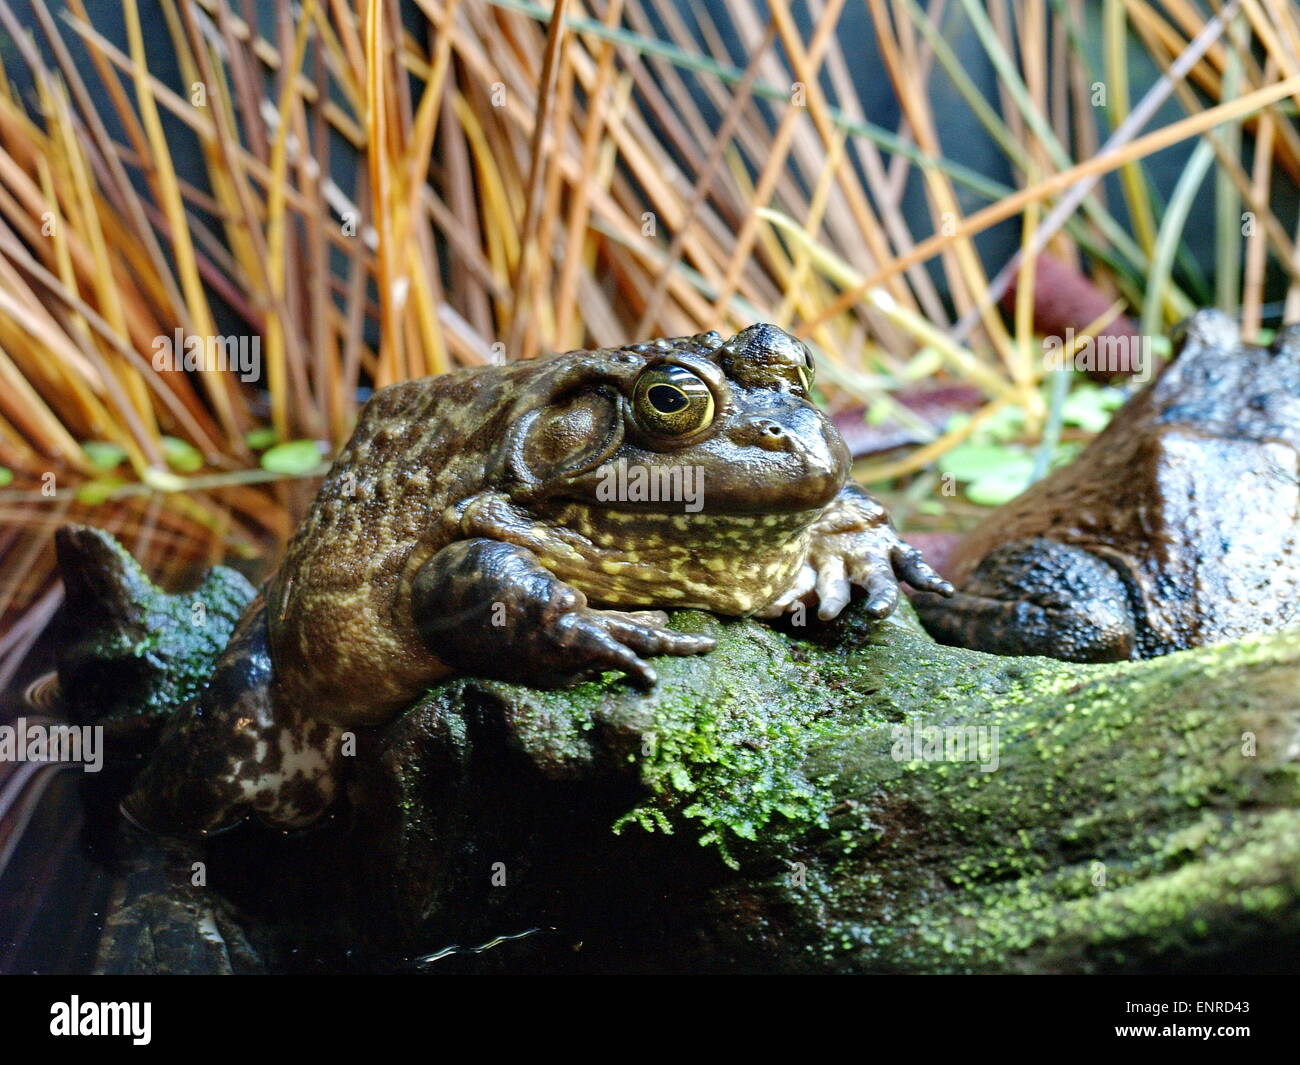 Big frog in it's natural environment Stock Photo